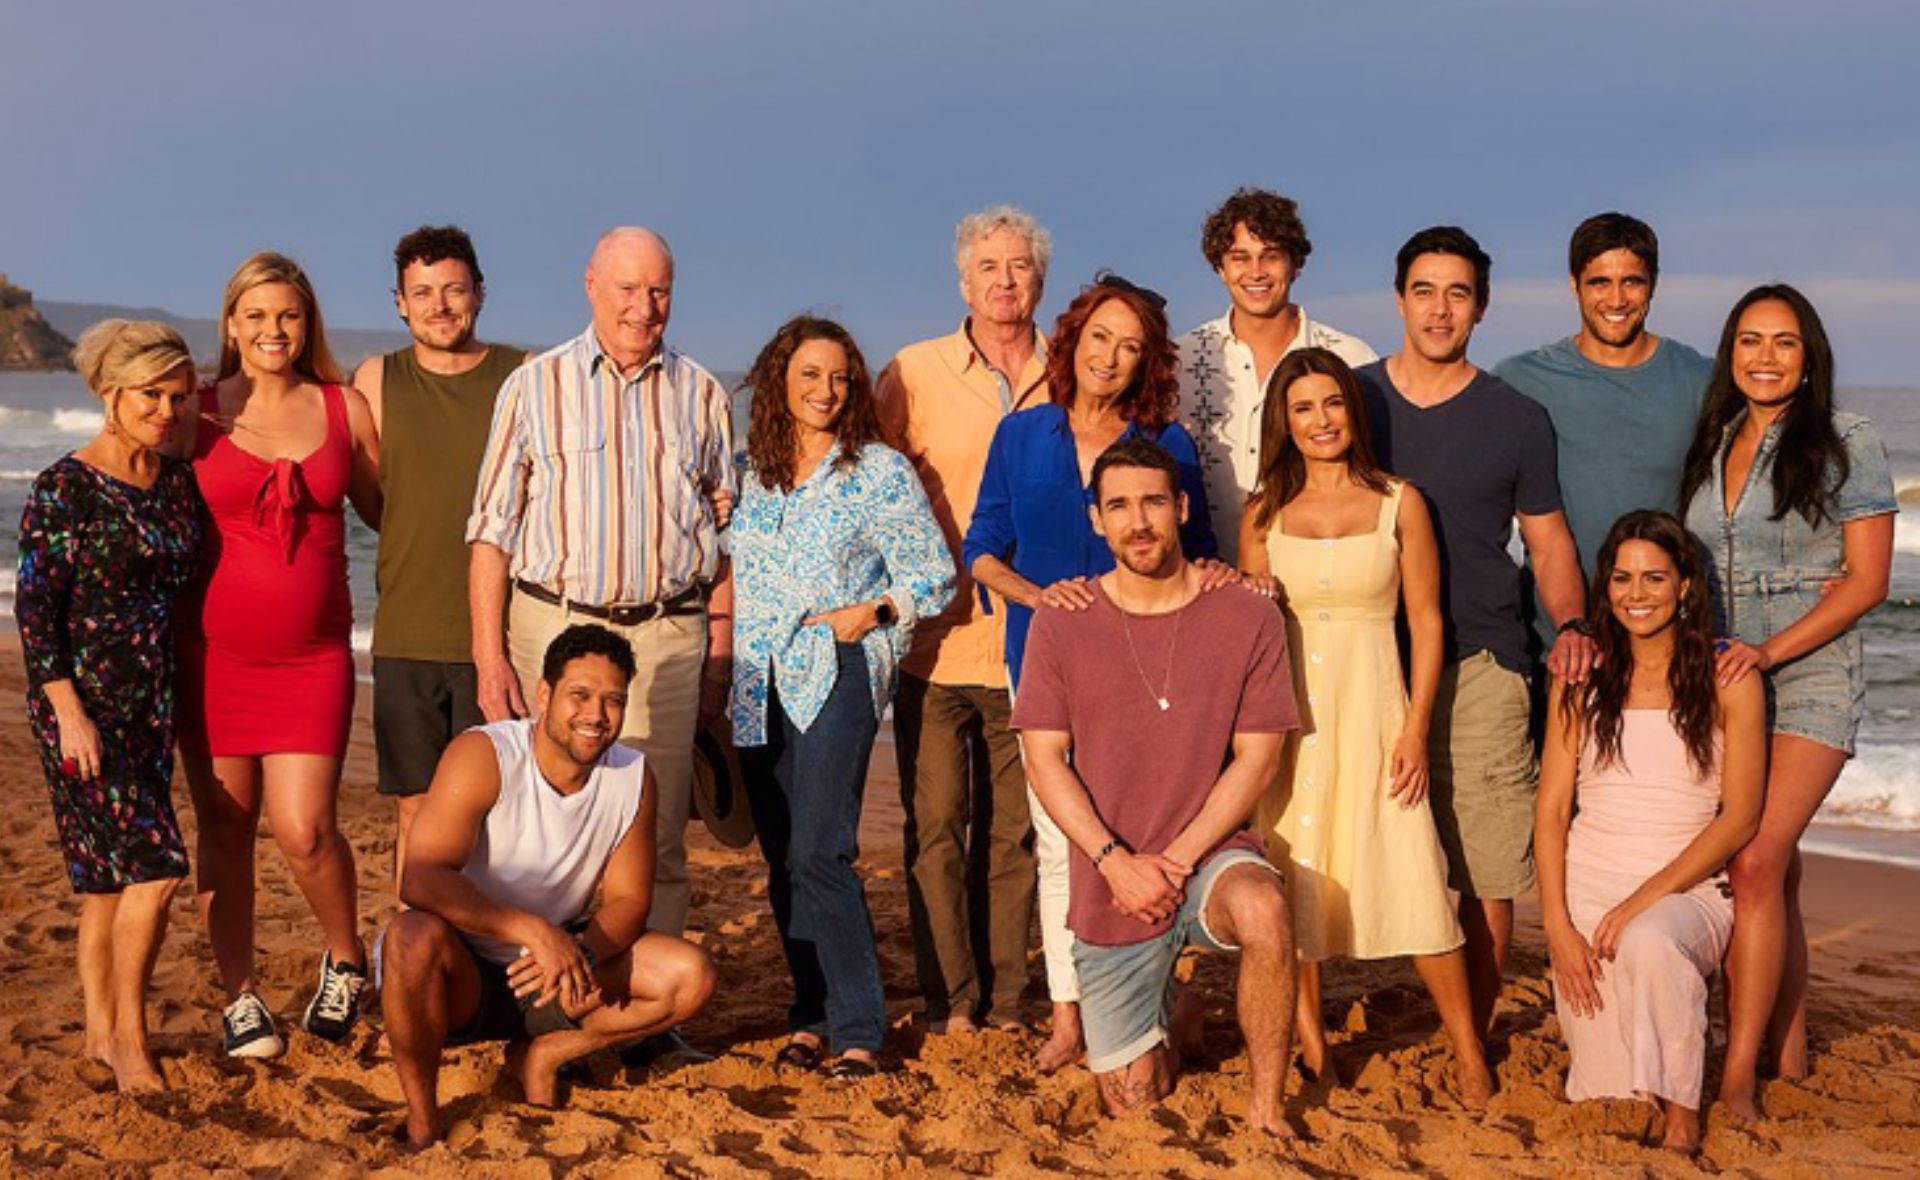 Home and Away stars gather to celebrate big milestone for Lynne McGranger